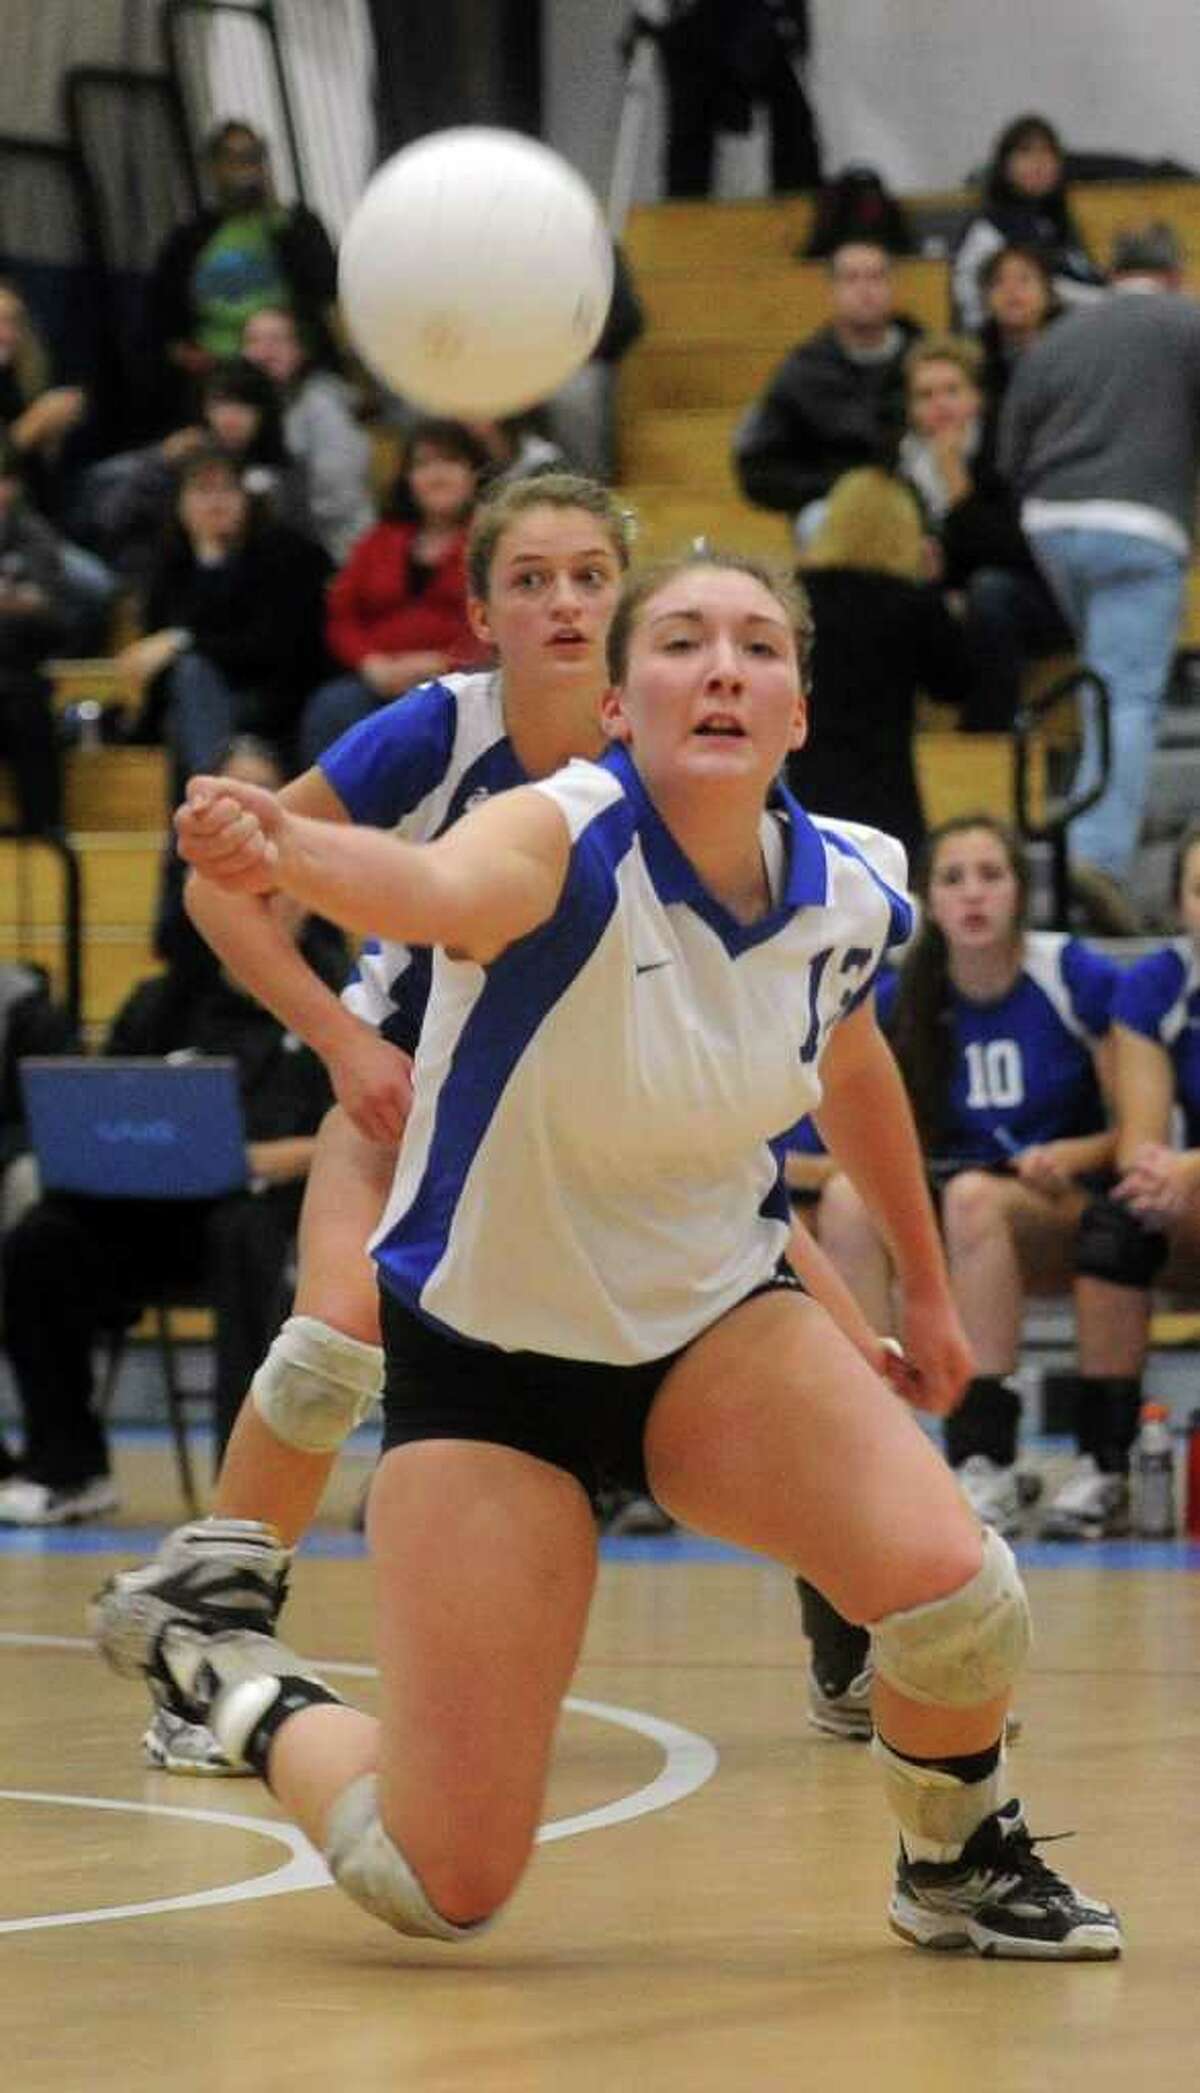 Darien's Bella Carrara reaches for a ball during Saturday's Class L Volleyball Championship game against East Lyme at Glastonbury High School on November 20, 2010.